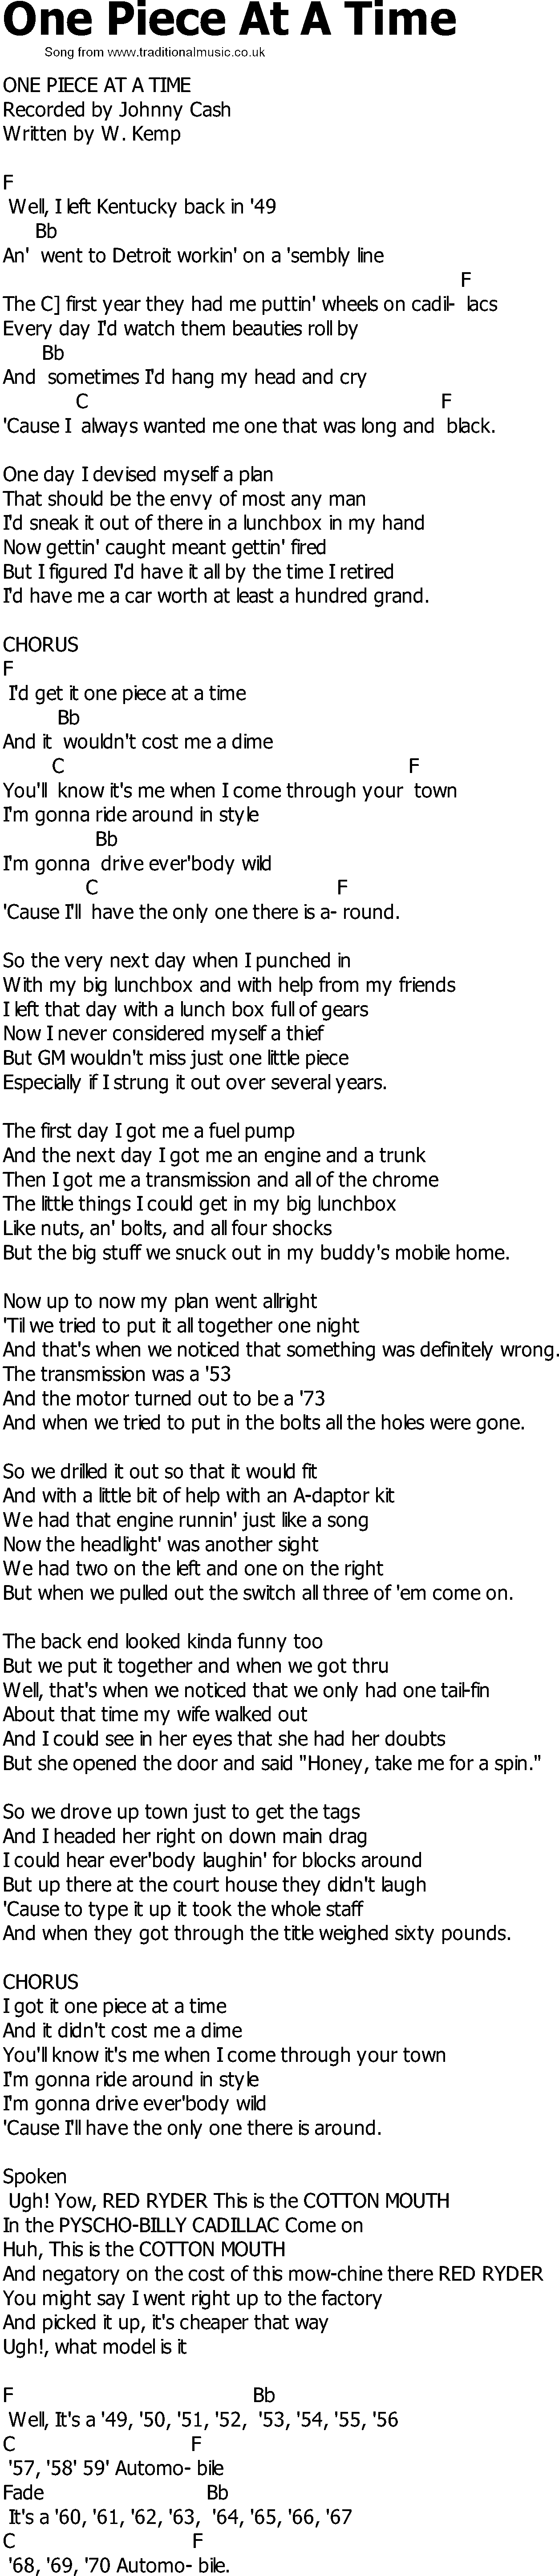 Old Country song lyrics with chords - One Piece At A Time